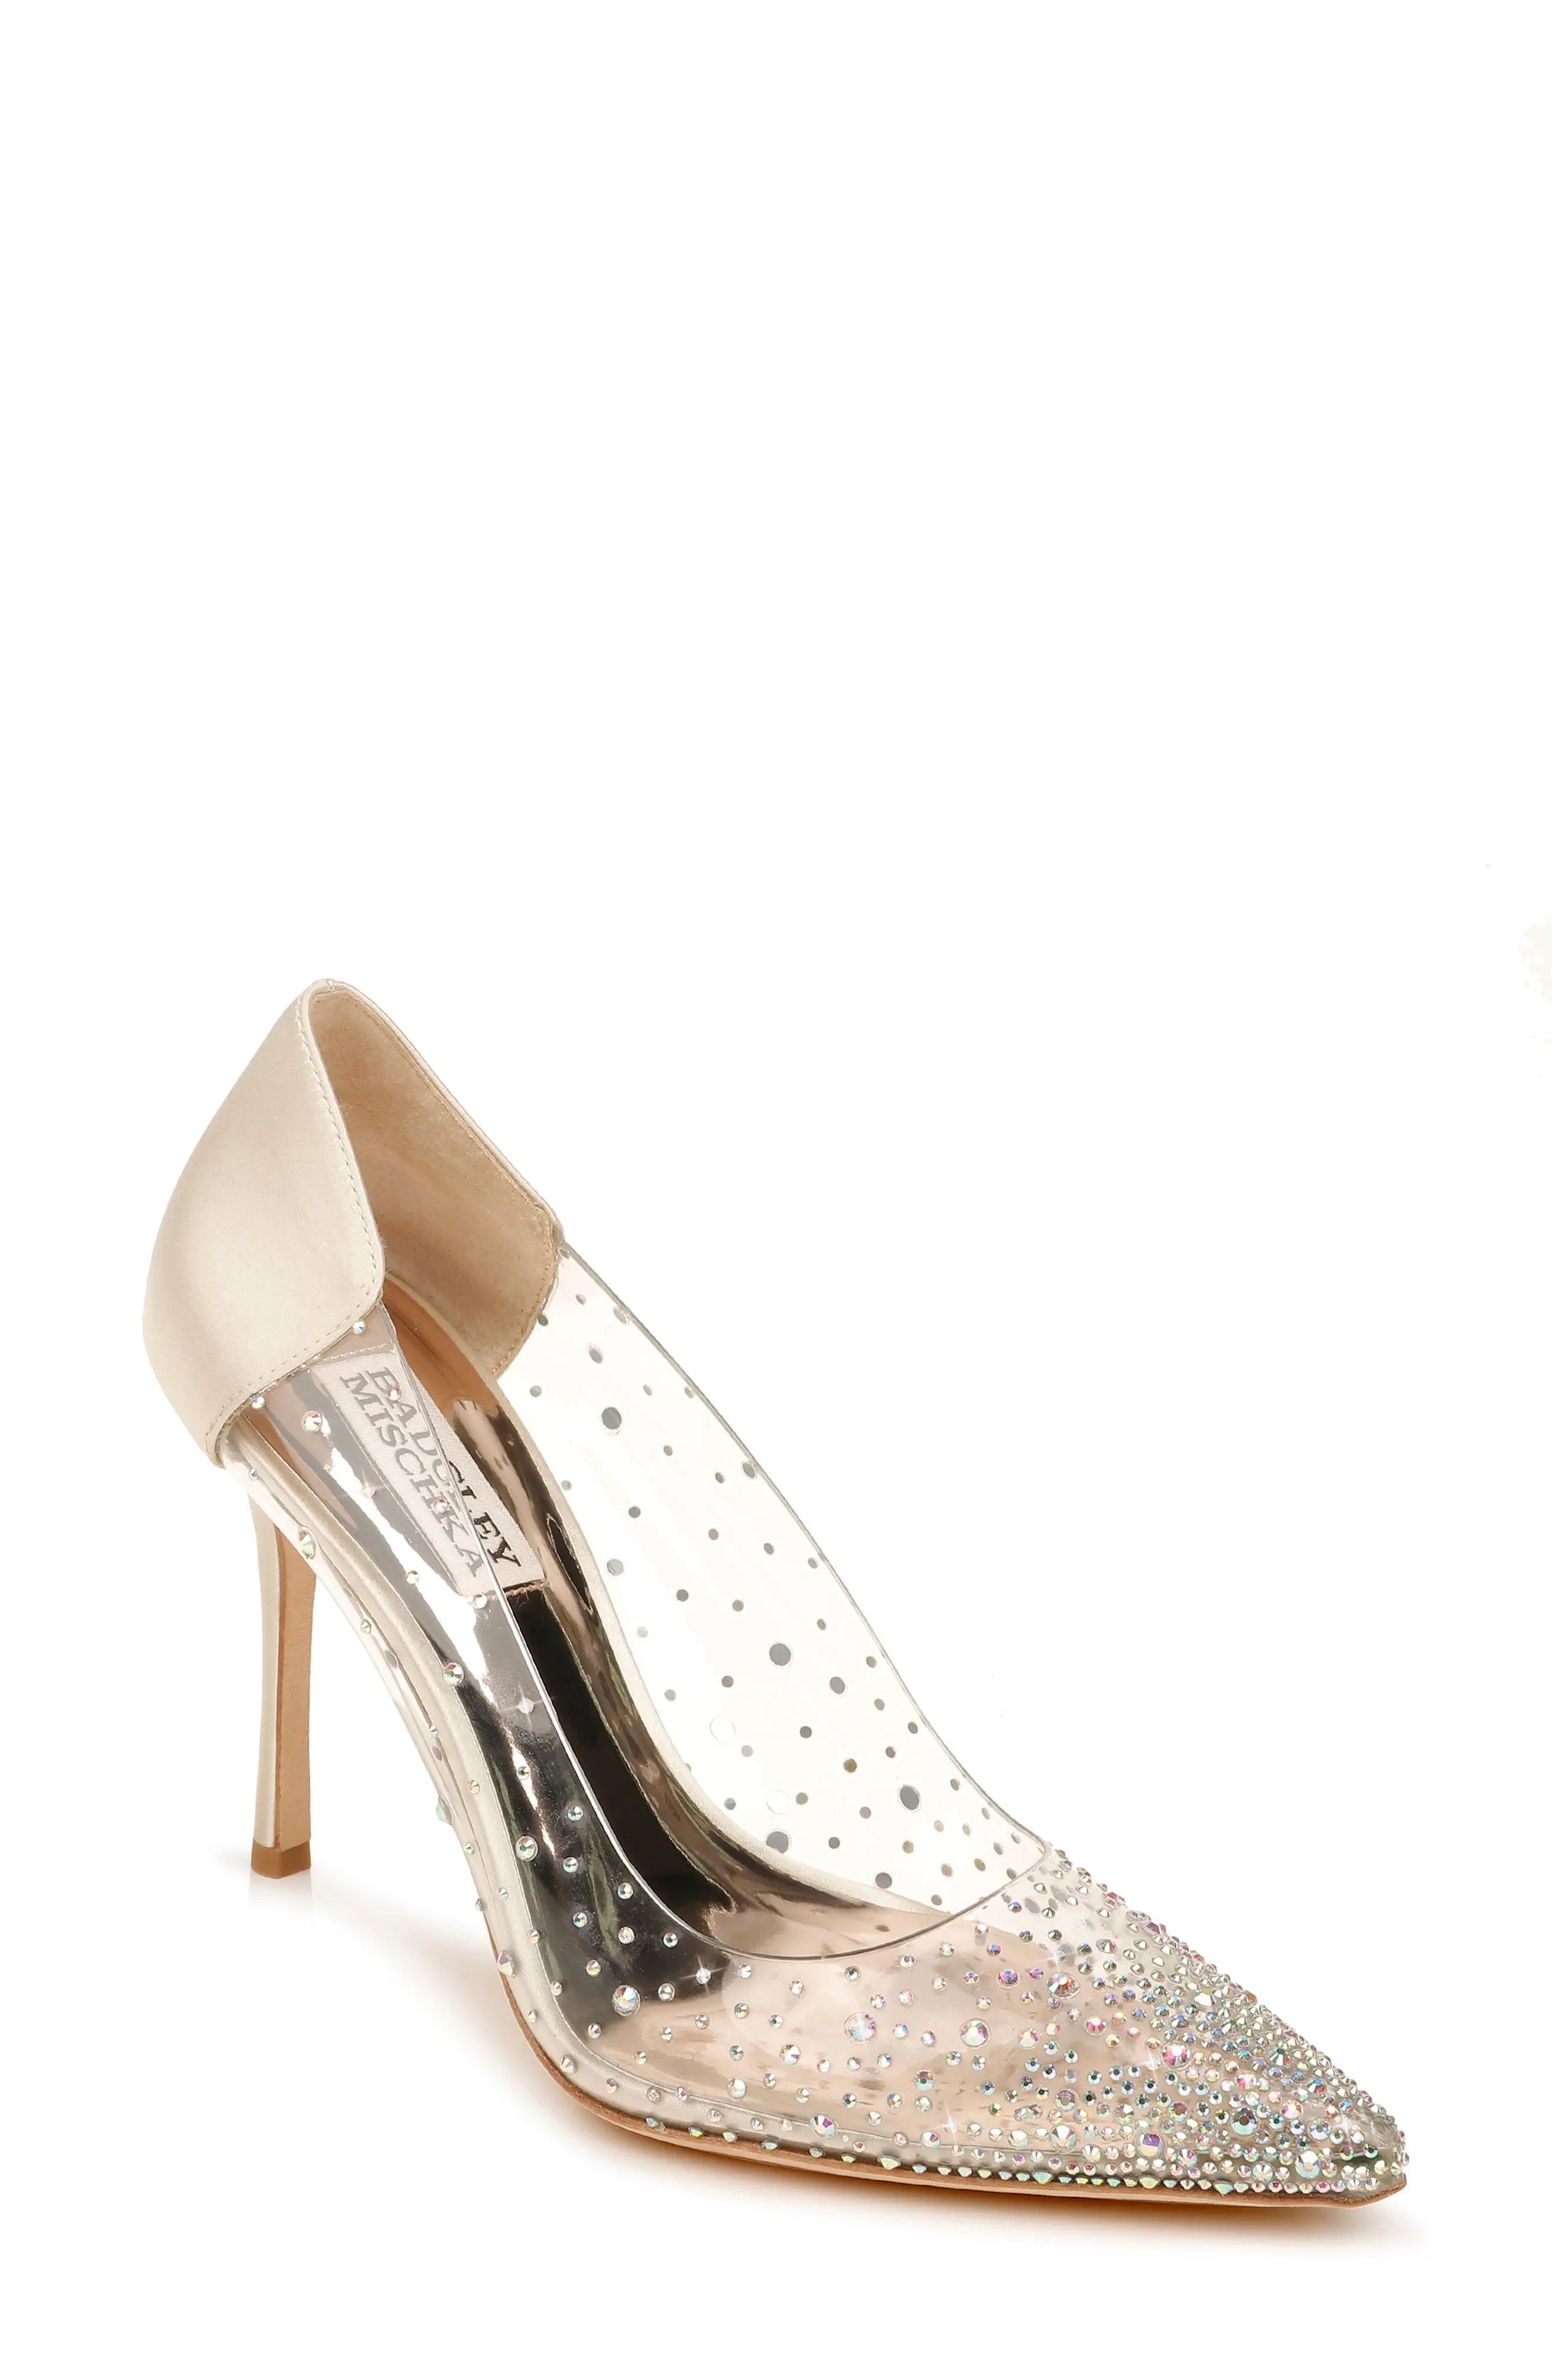 Women's Badgley Mischka Collection Gisela Embellished Pointed Toe Pump, Size 7.5 M - Ivory | Nordstrom